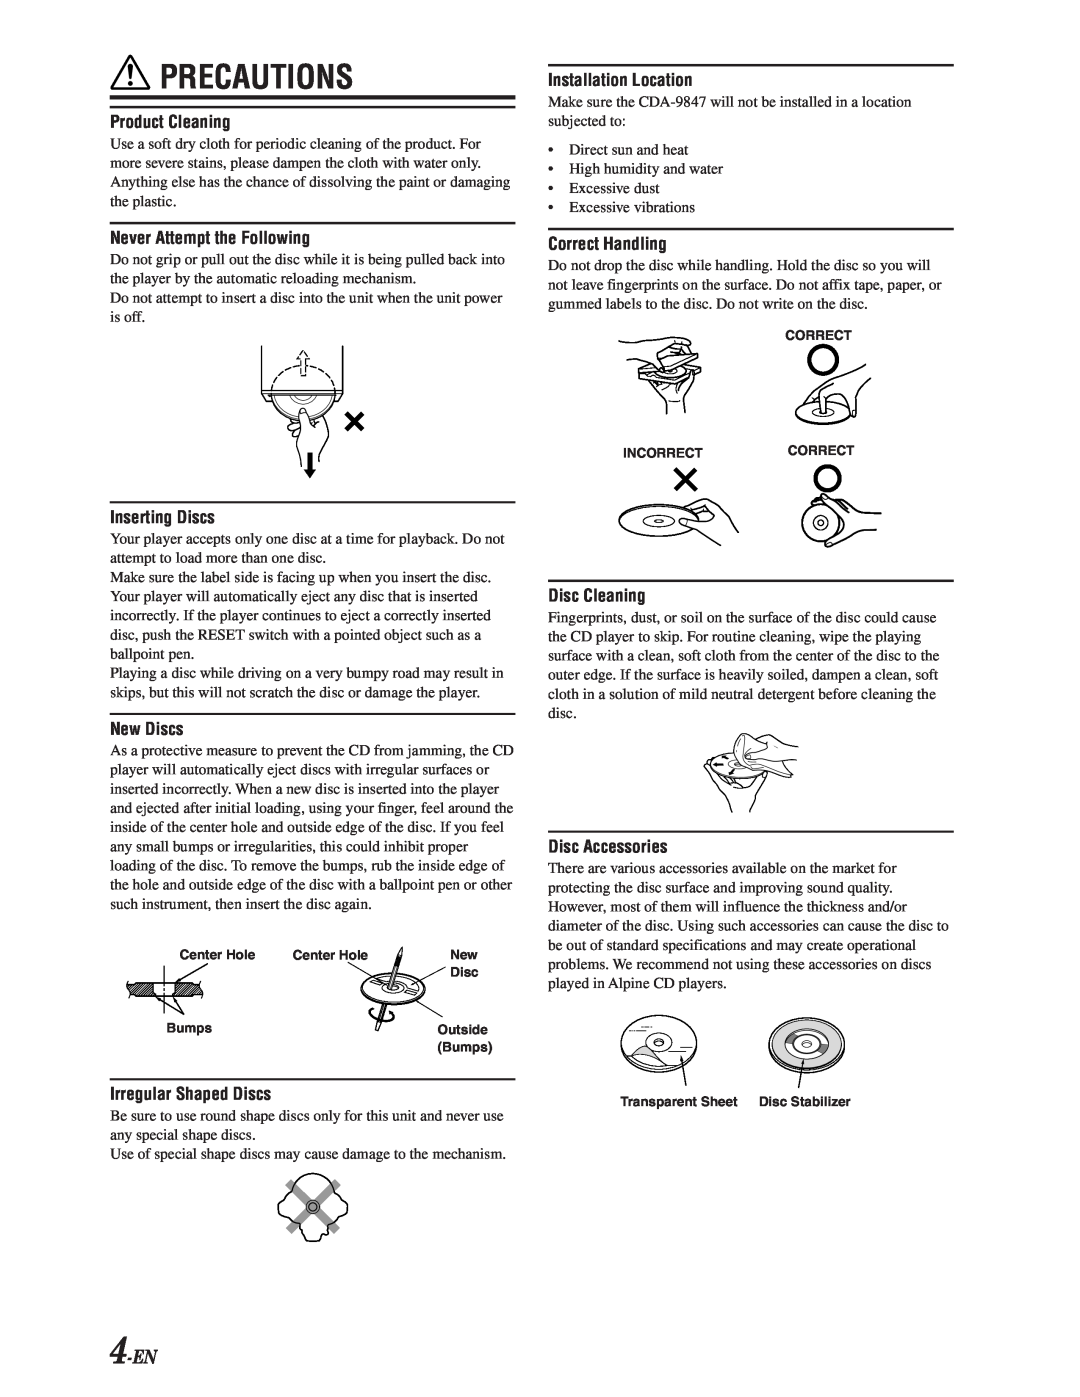 Alpine CDA-9847 owner manual 4-EN, Precautions, Product Cleaning, Never Attempt the Following, Inserting Discs, New Discs 